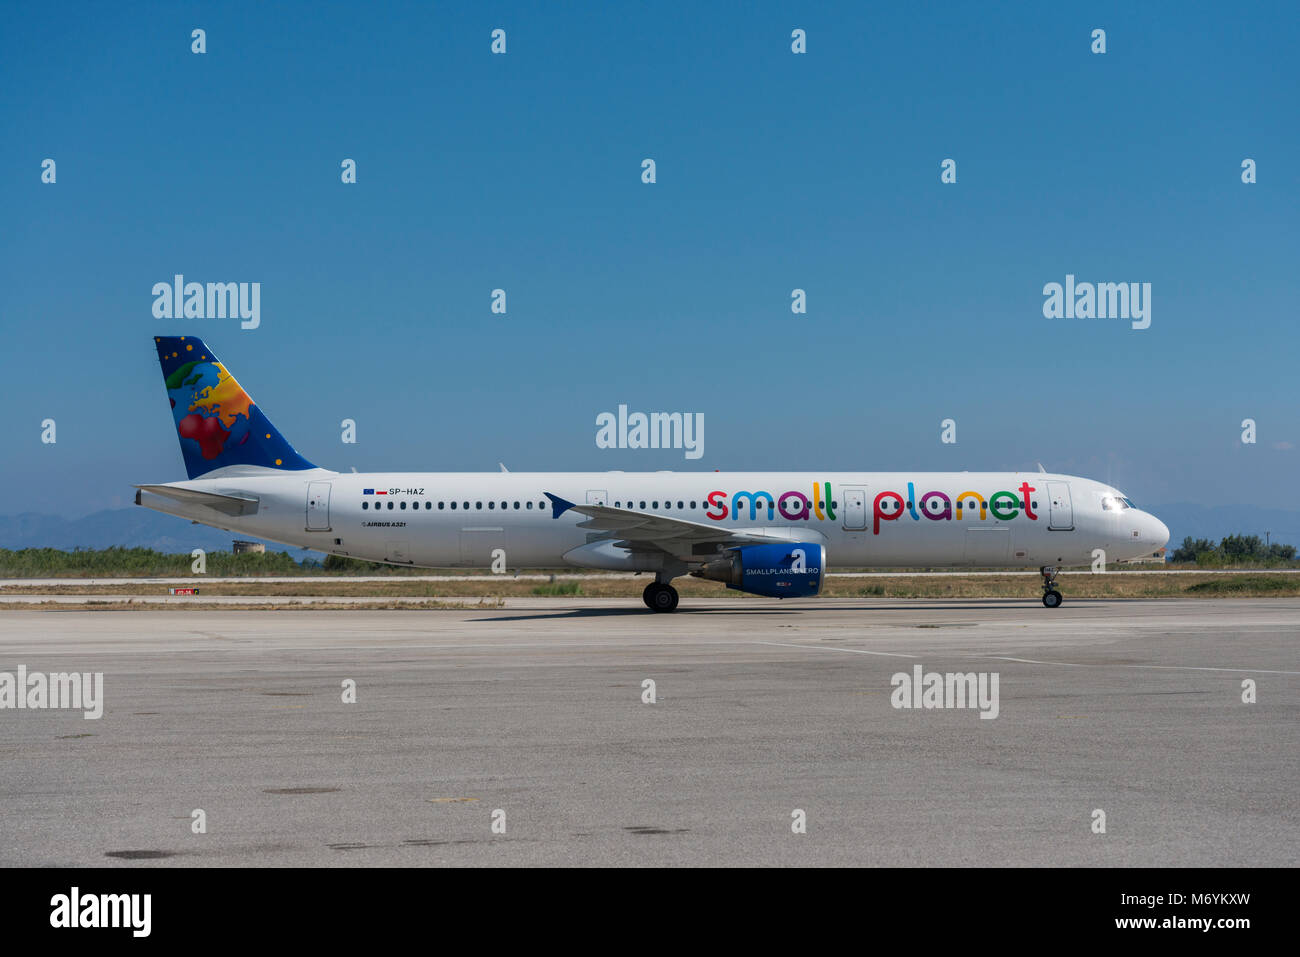 Small Planet Airlines plane Poland Airbus A321-200 with registration SP-HAZ at the Rhodes international airport Stock Photo